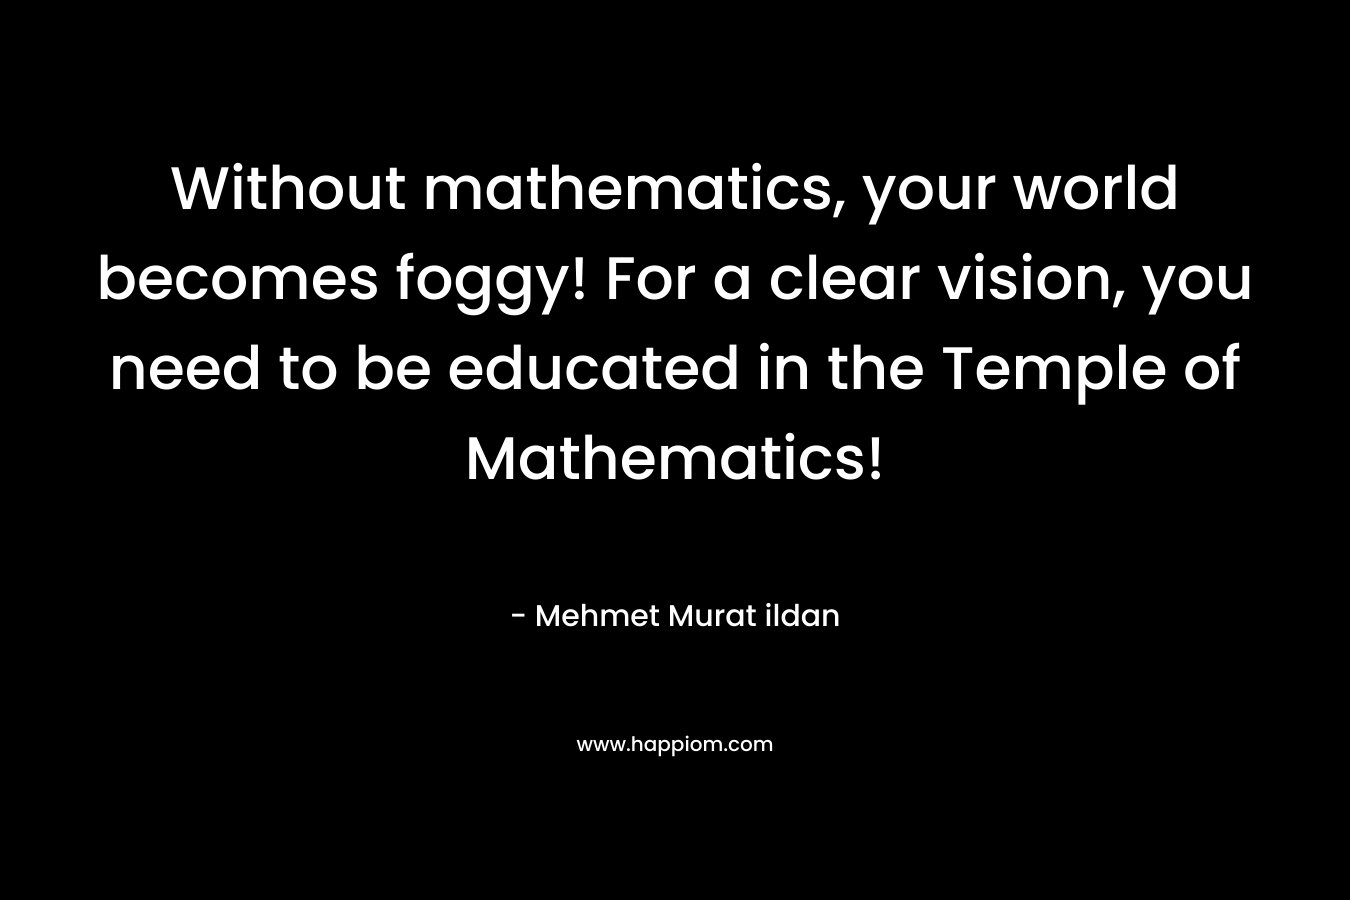 Without mathematics, your world becomes foggy! For a clear vision, you need to be educated in the Temple of Mathematics!